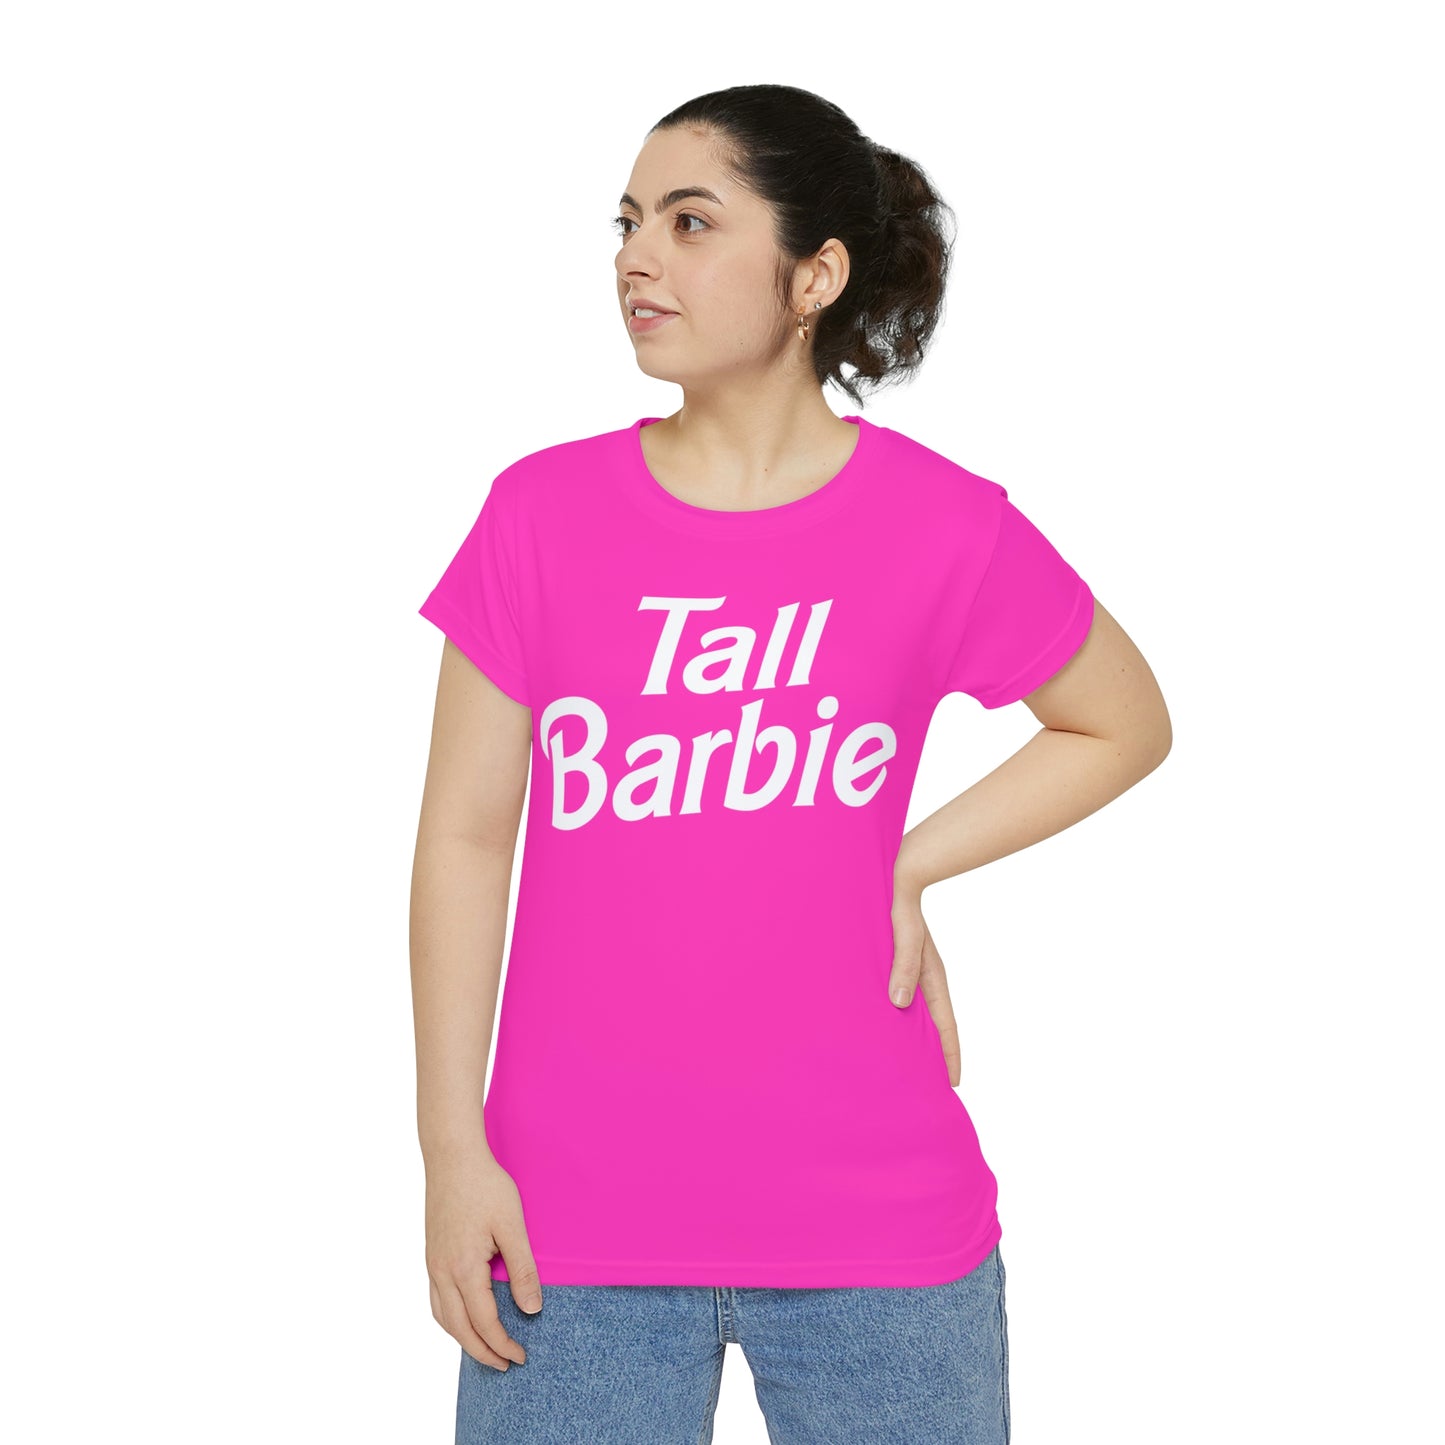 Tall Barbie, Bachelorette Party Shirts, Bridesmaid Gifts, Here comes the Party Tees, Group Party Favor Shirts, Bridal Party Shirt for women